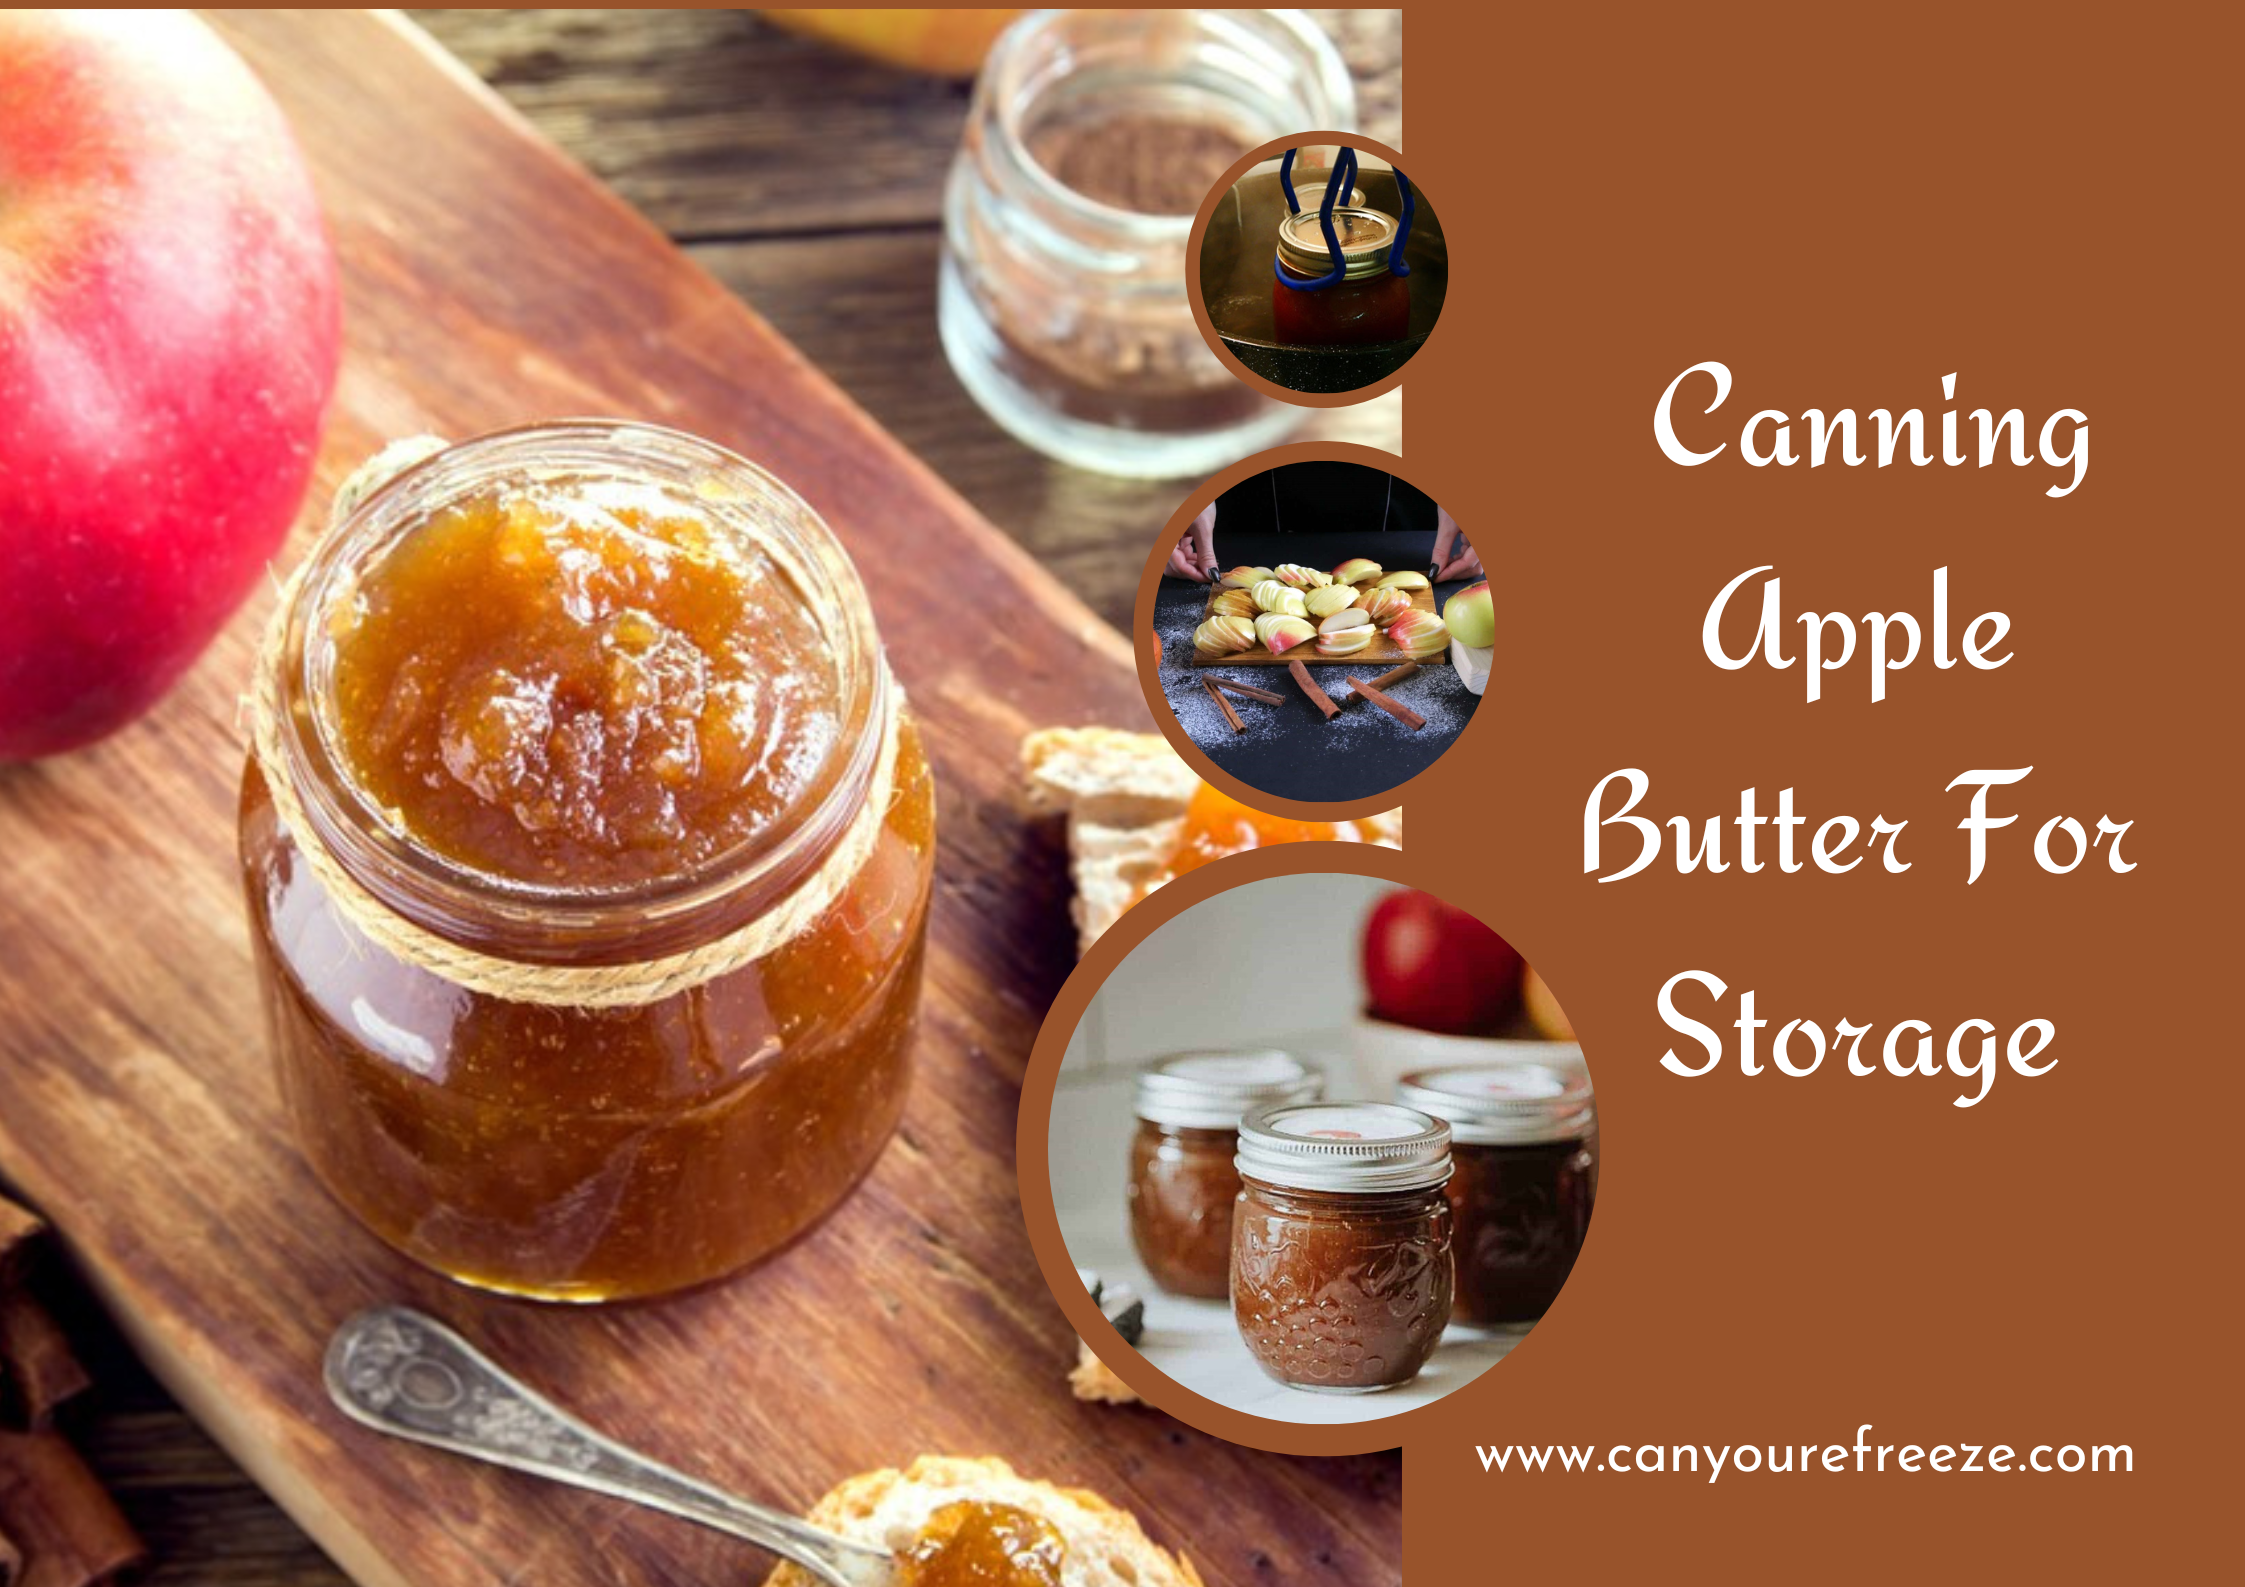 Canning Apple Butter For Storage